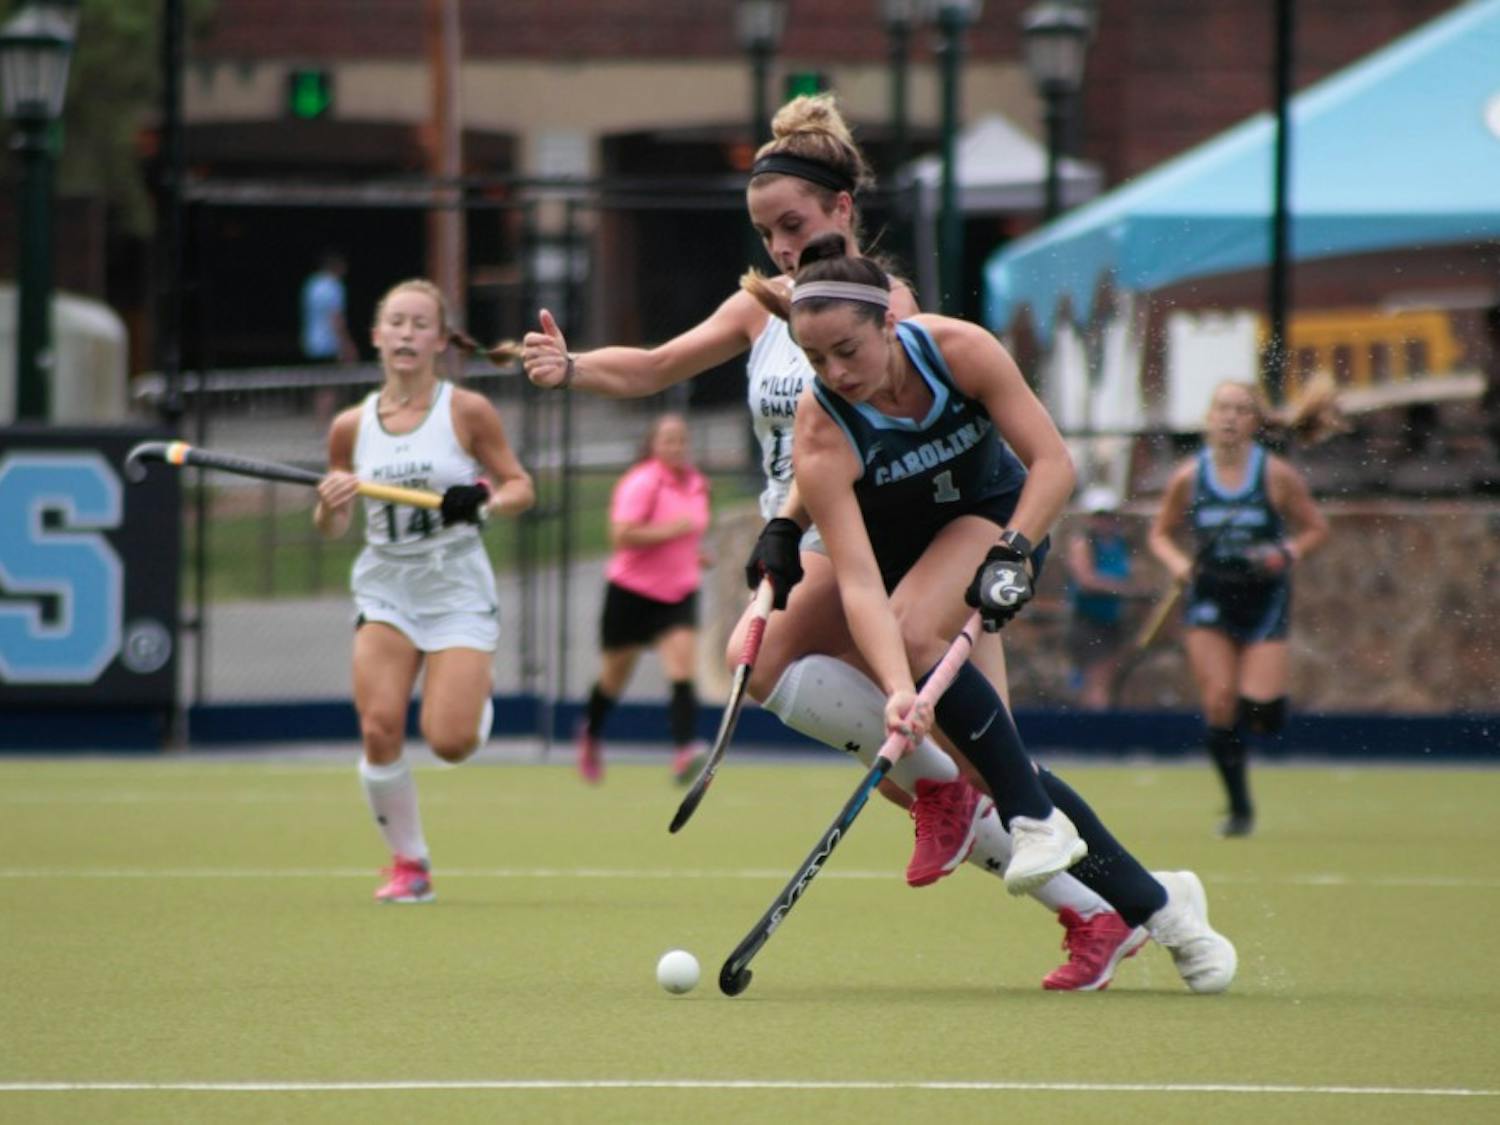 Forward Erin Matson (1) prepares to hit the ball on Sunday Sept. 15, 2019. UNC won 8-0 against William and Mary.